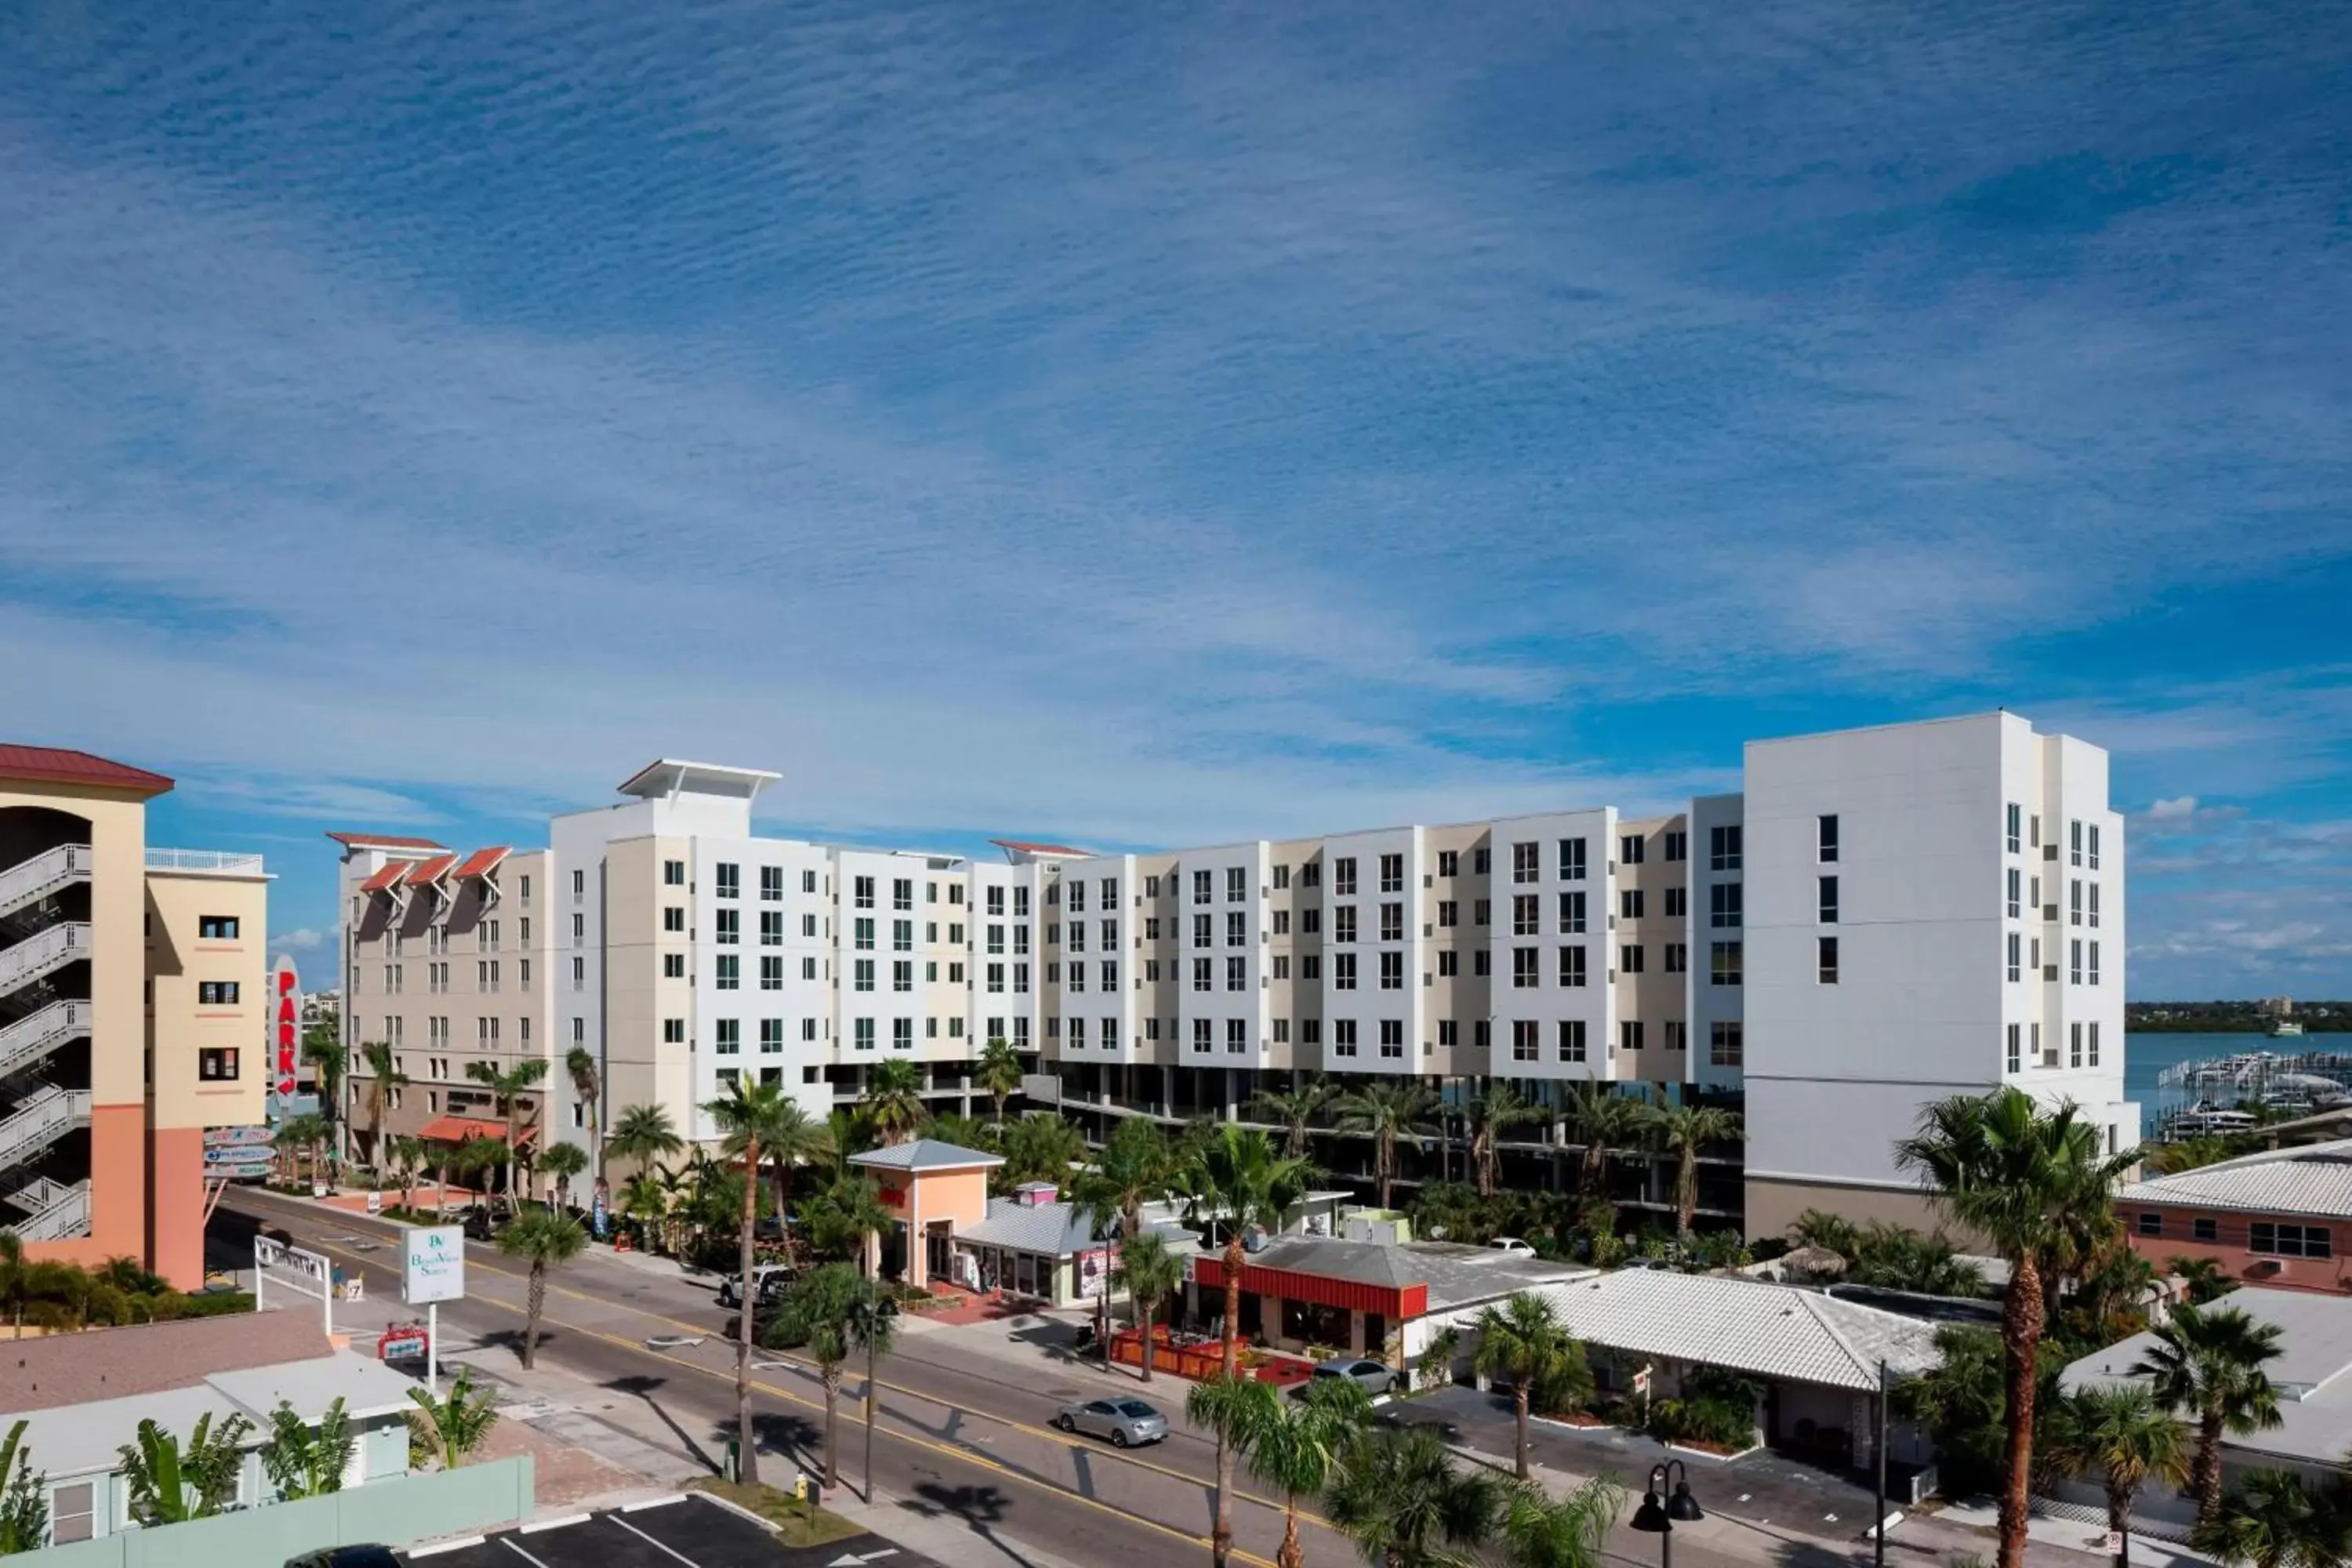 Property building in SpringHill Suites by Marriott Clearwater Beach